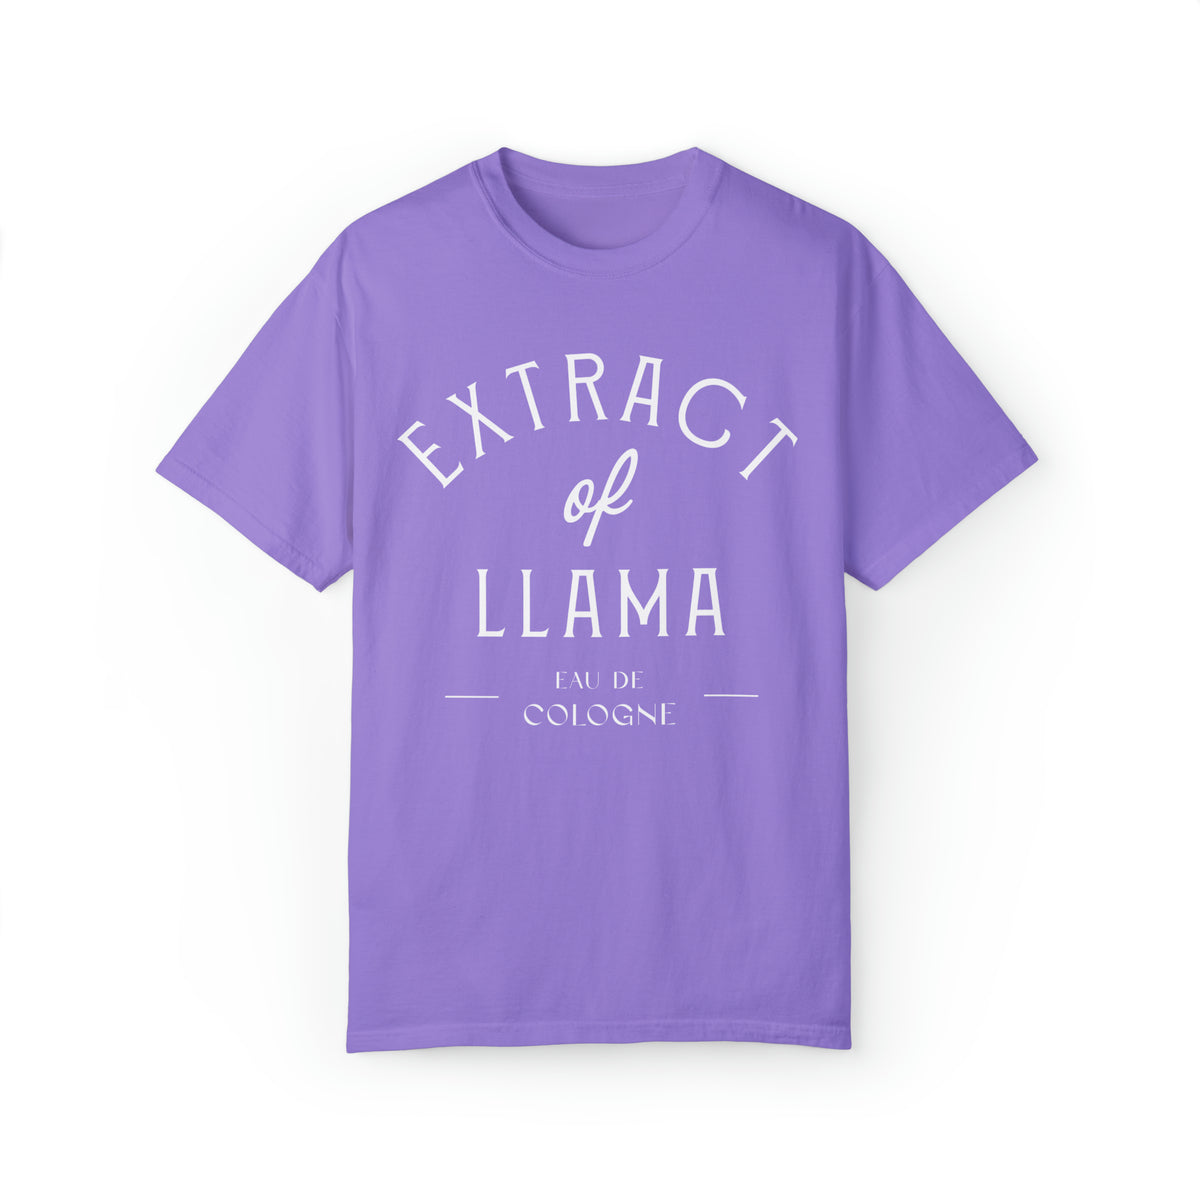 Extract of Llama Comfort Colors Unisex Garment-Dyed T-shirt